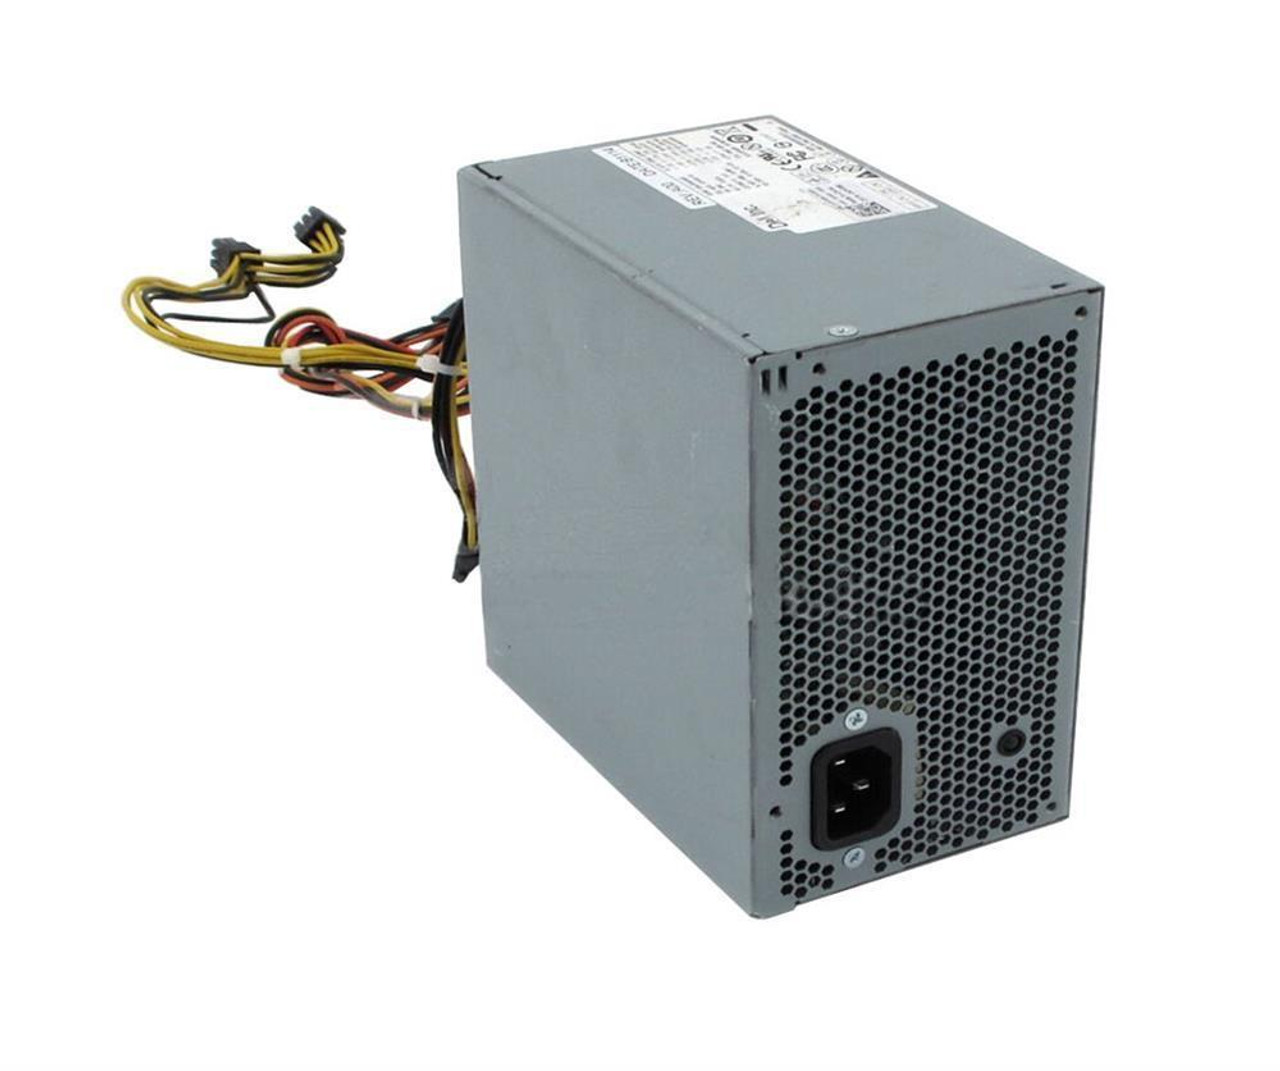 6GPR9 Dell 460-Watts Power Supply for XPS 8500 Tower